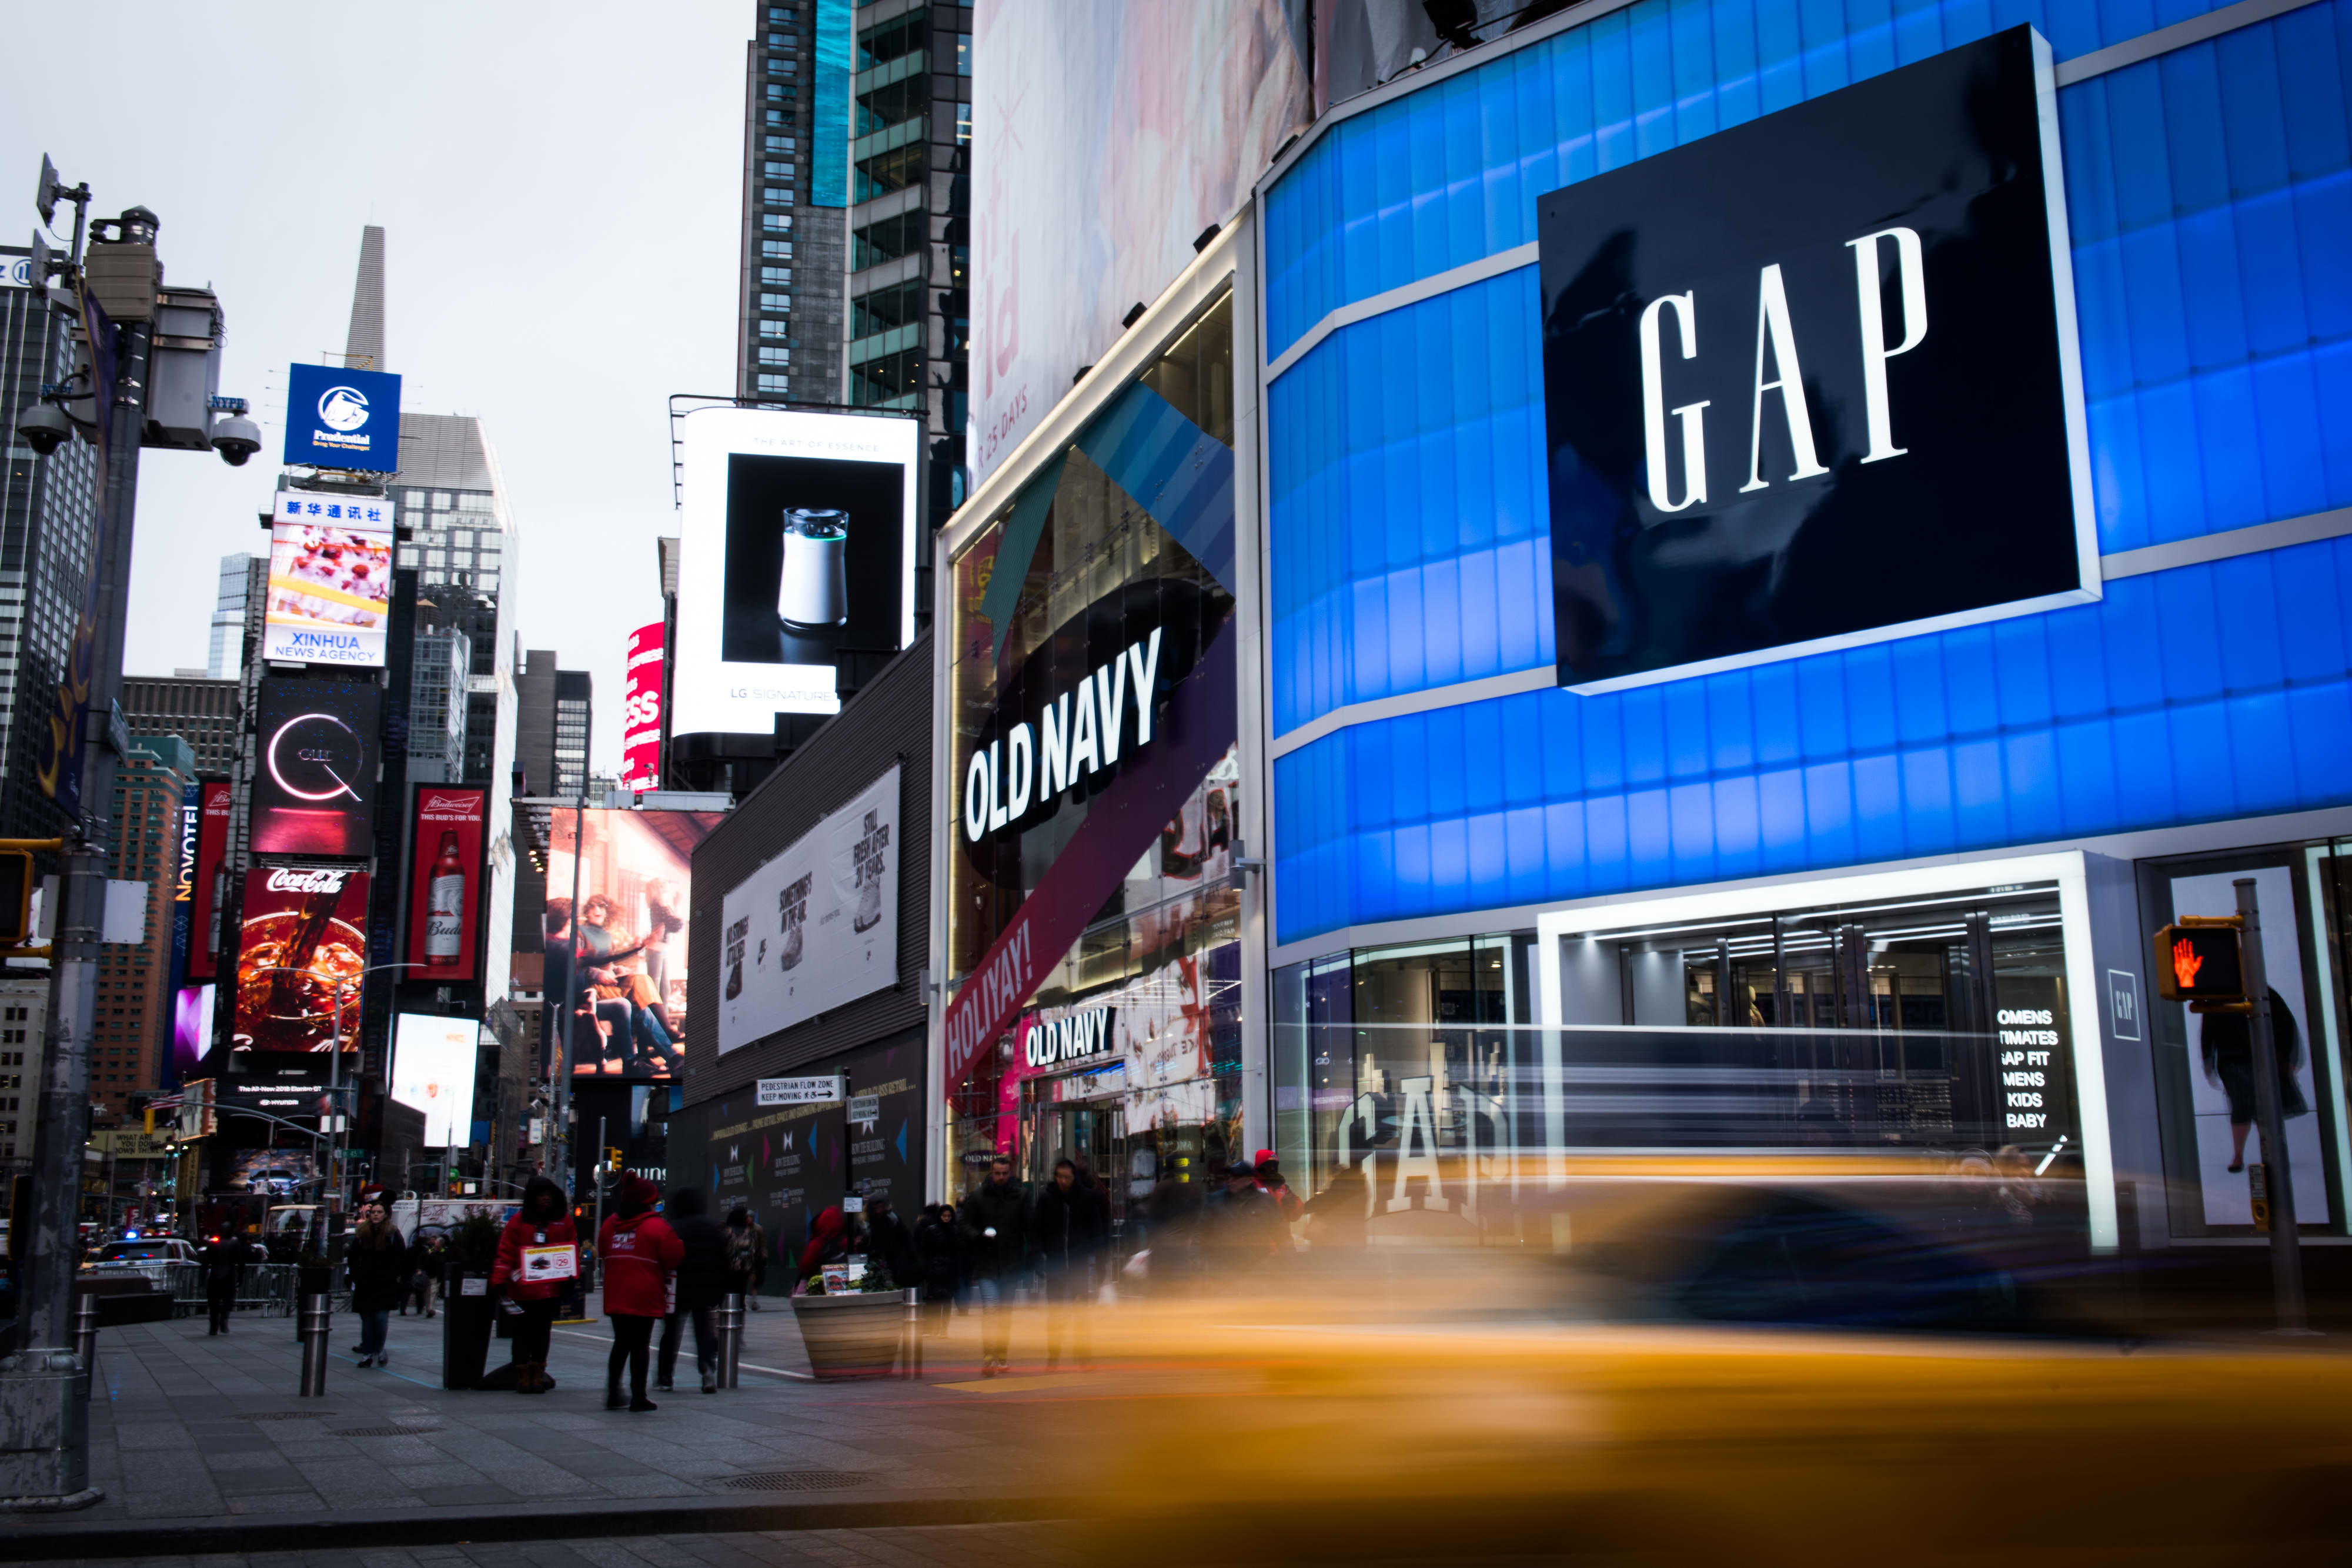 Gap Banks On Athleta And Old Navy As It Exits U.K. And Shifts To Franchise  In France And Italy